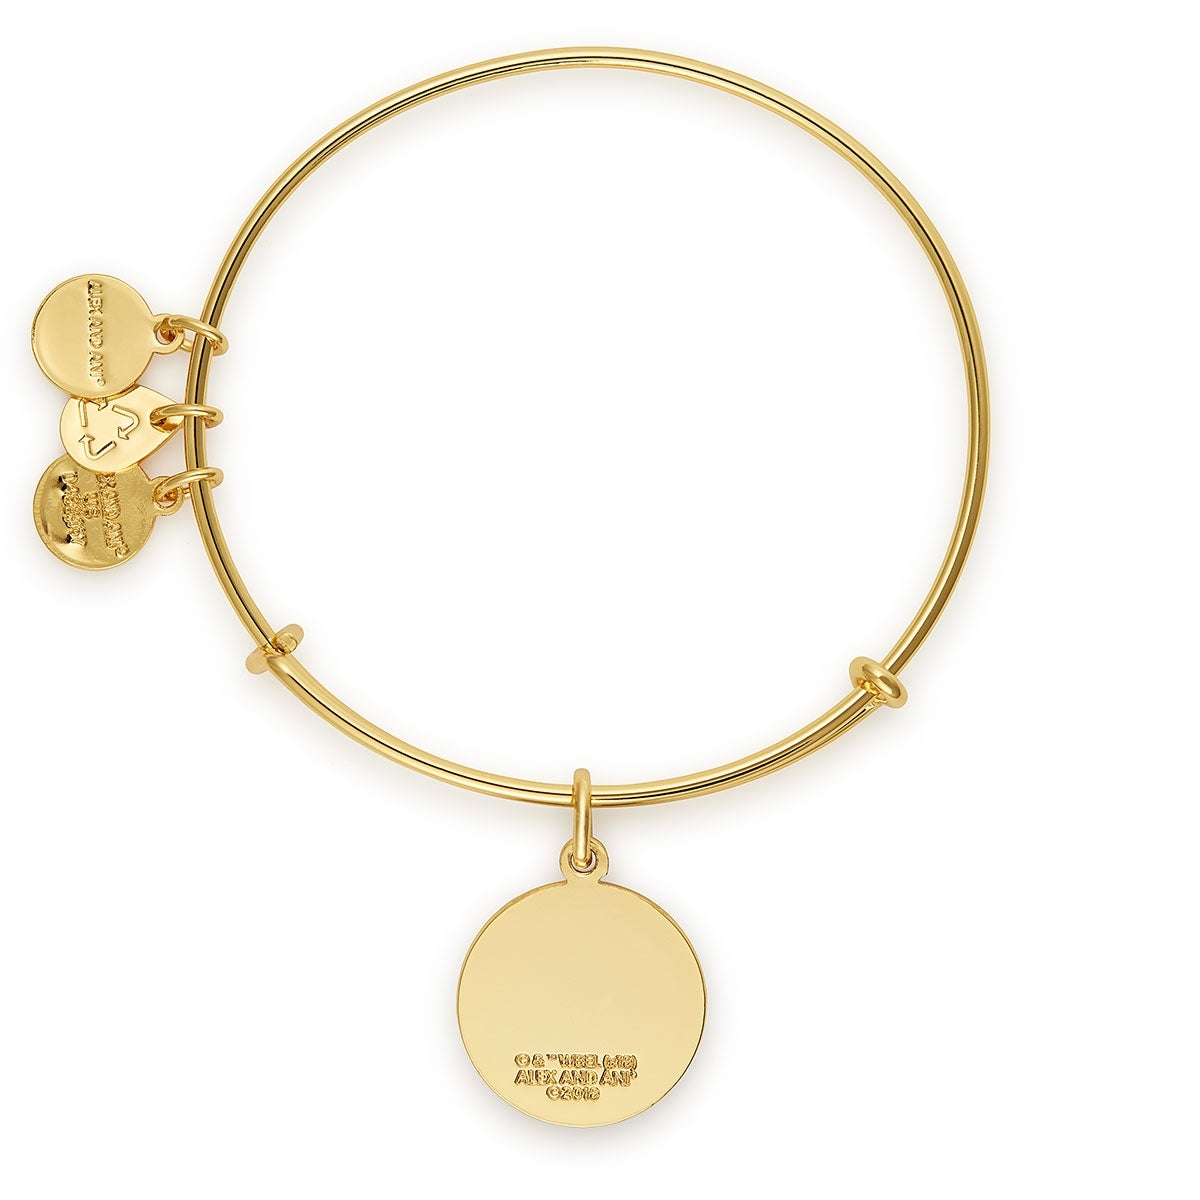 Harry Potter™ 'The Wand Chooses the Wizard' Charm Bangle